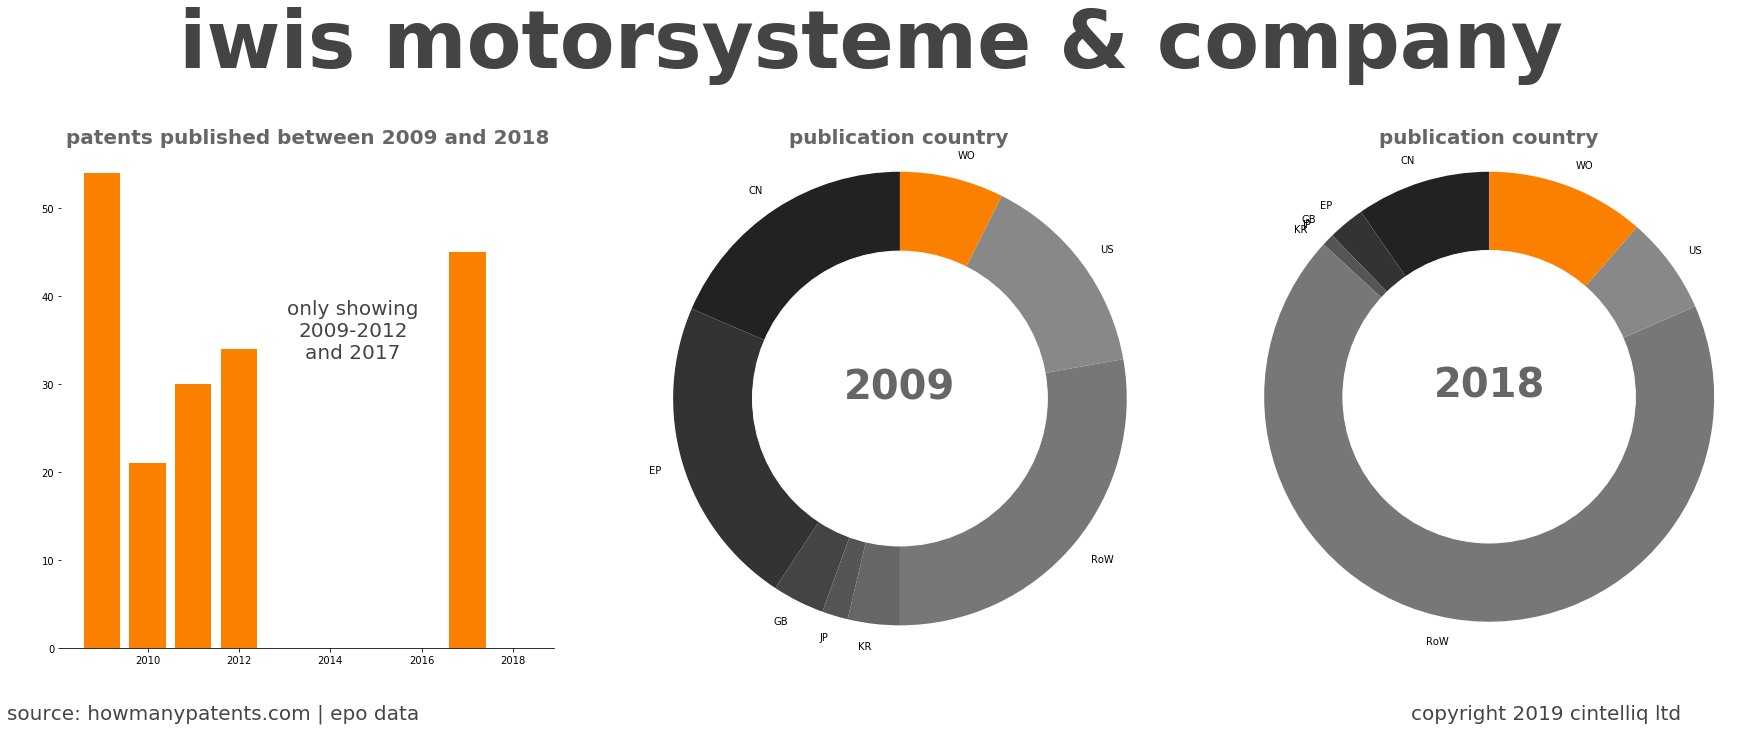 summary of patents for Iwis Motorsysteme & Company